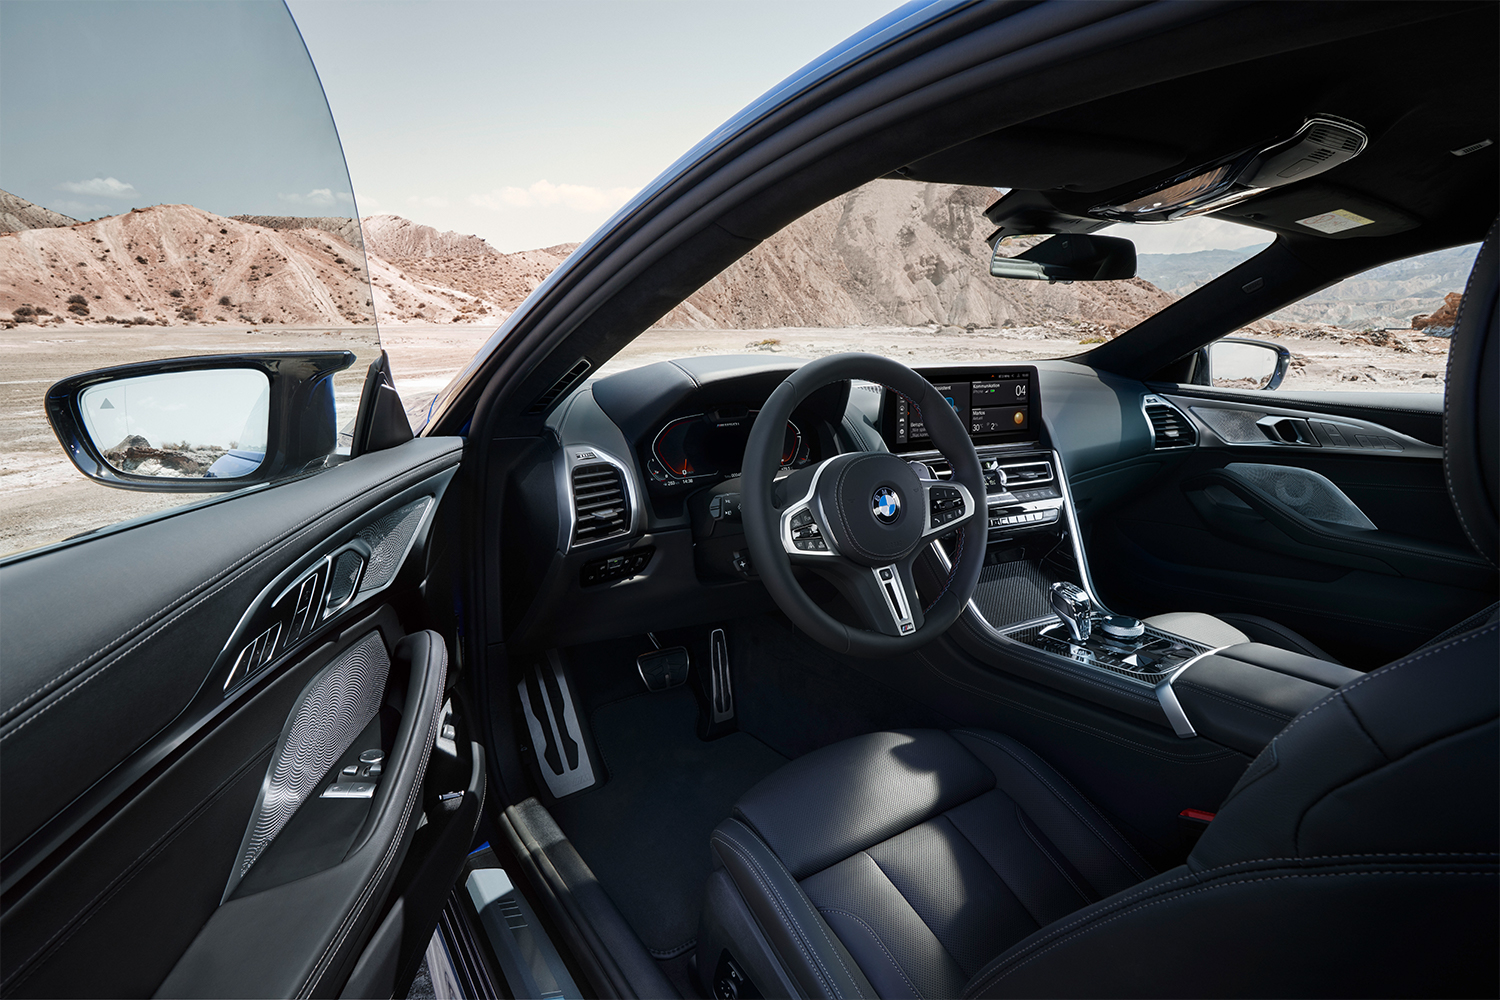 The high-tech cabin of the 2023 BMW M850i Coupe, though it features a healthy number of analog controls